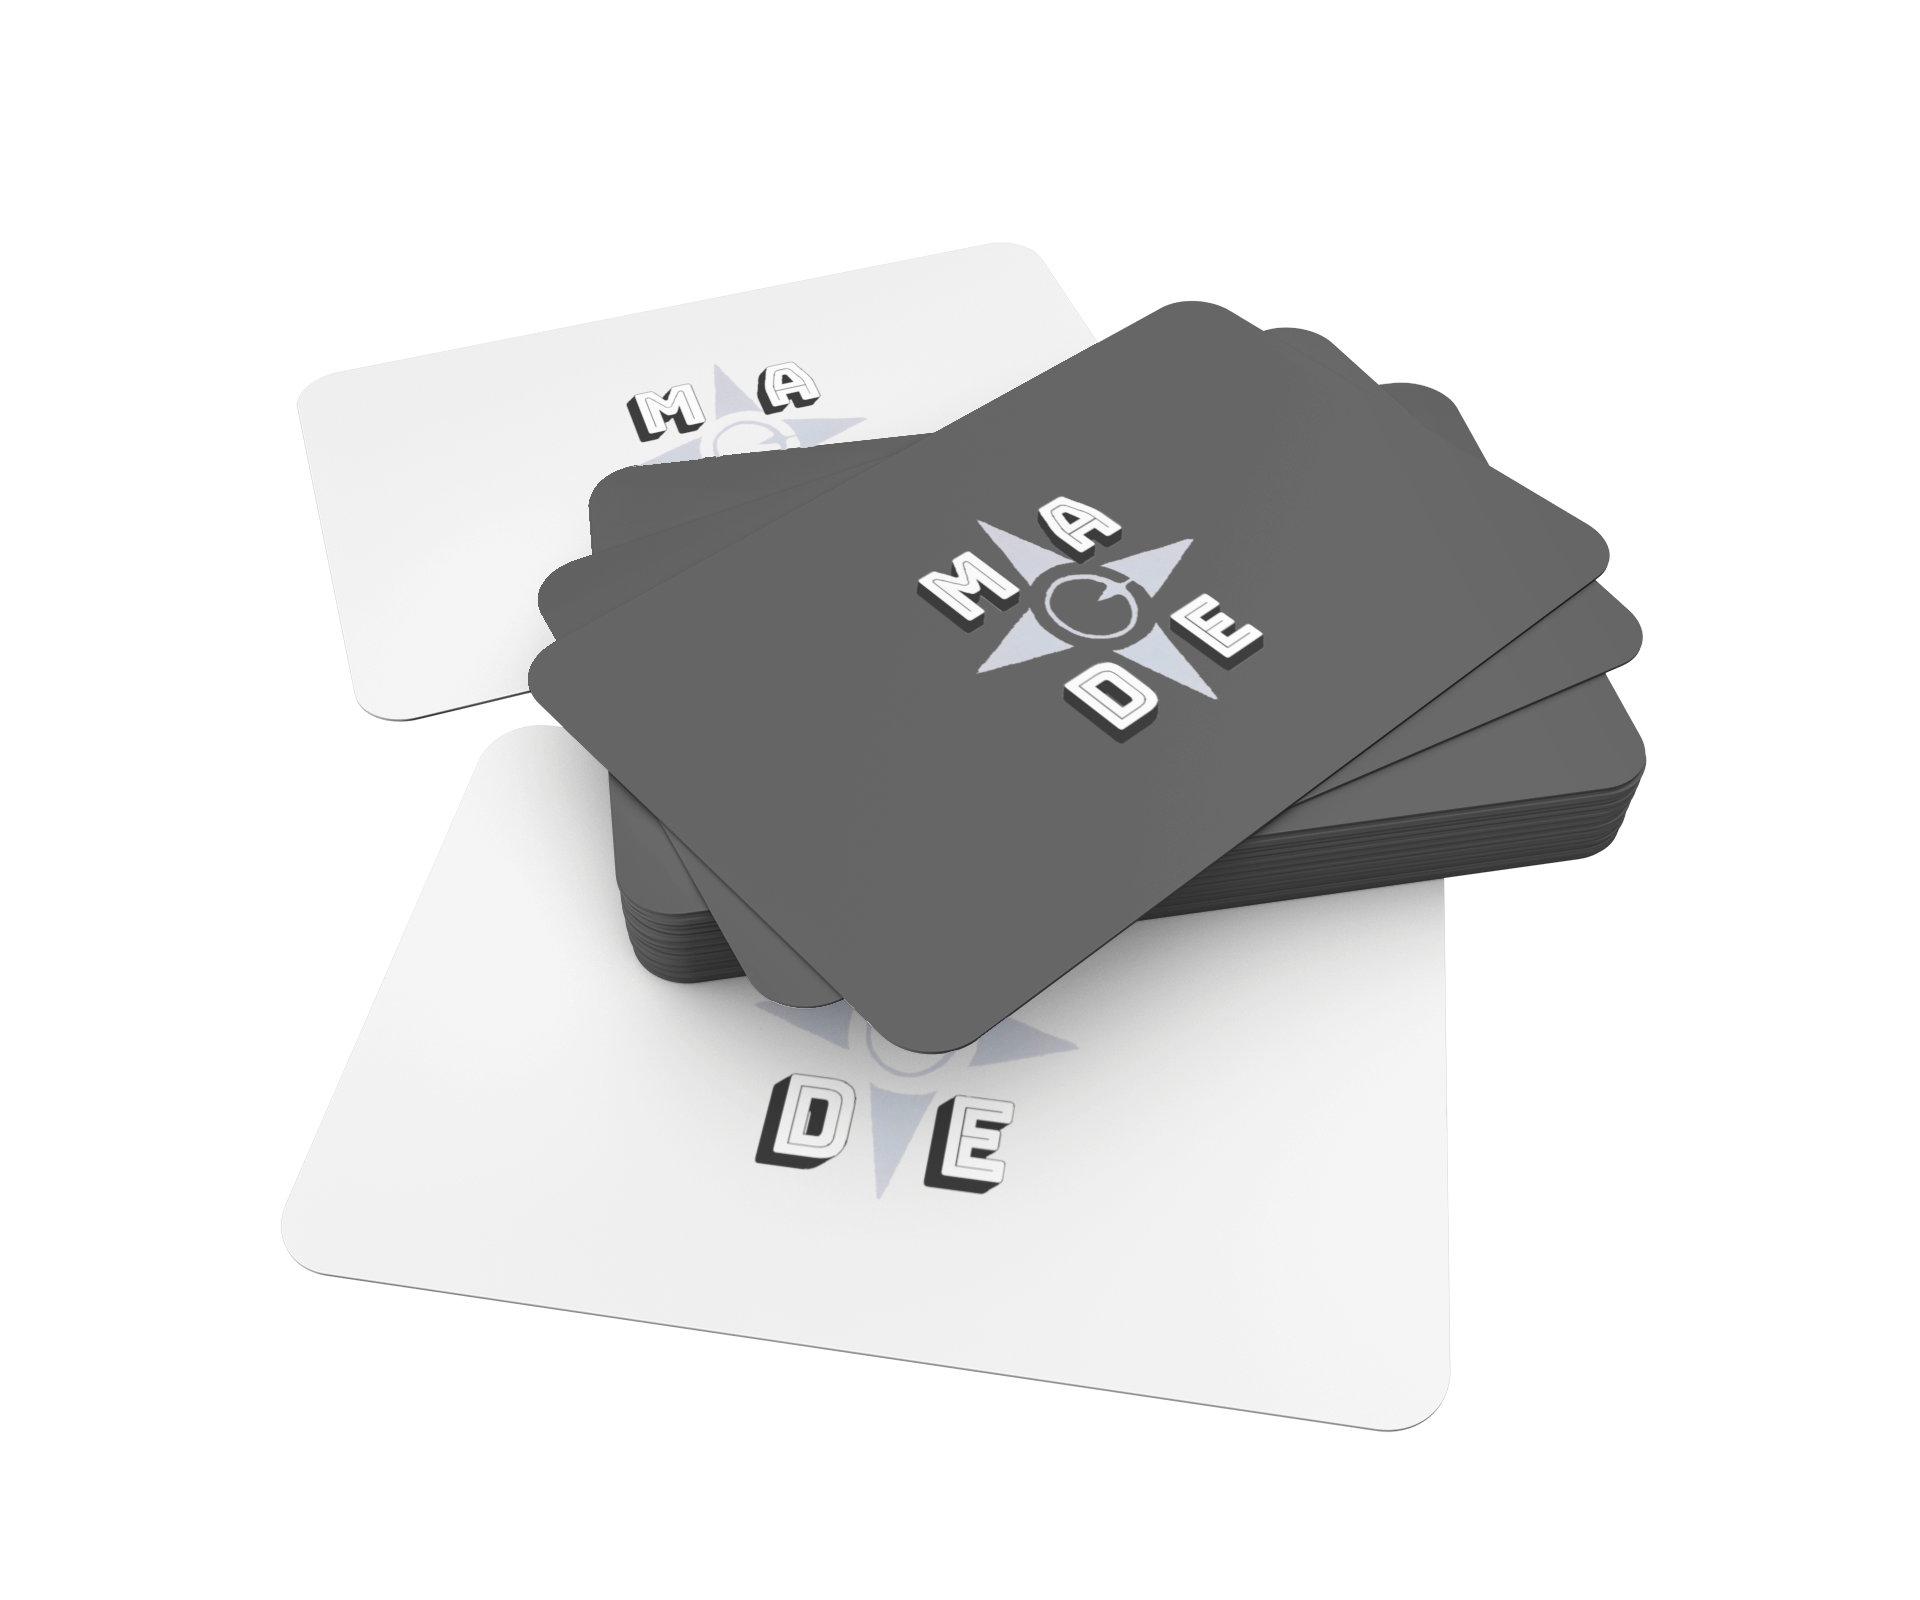 A stack of gray and white gift cards with a Made Inc logo printed on them